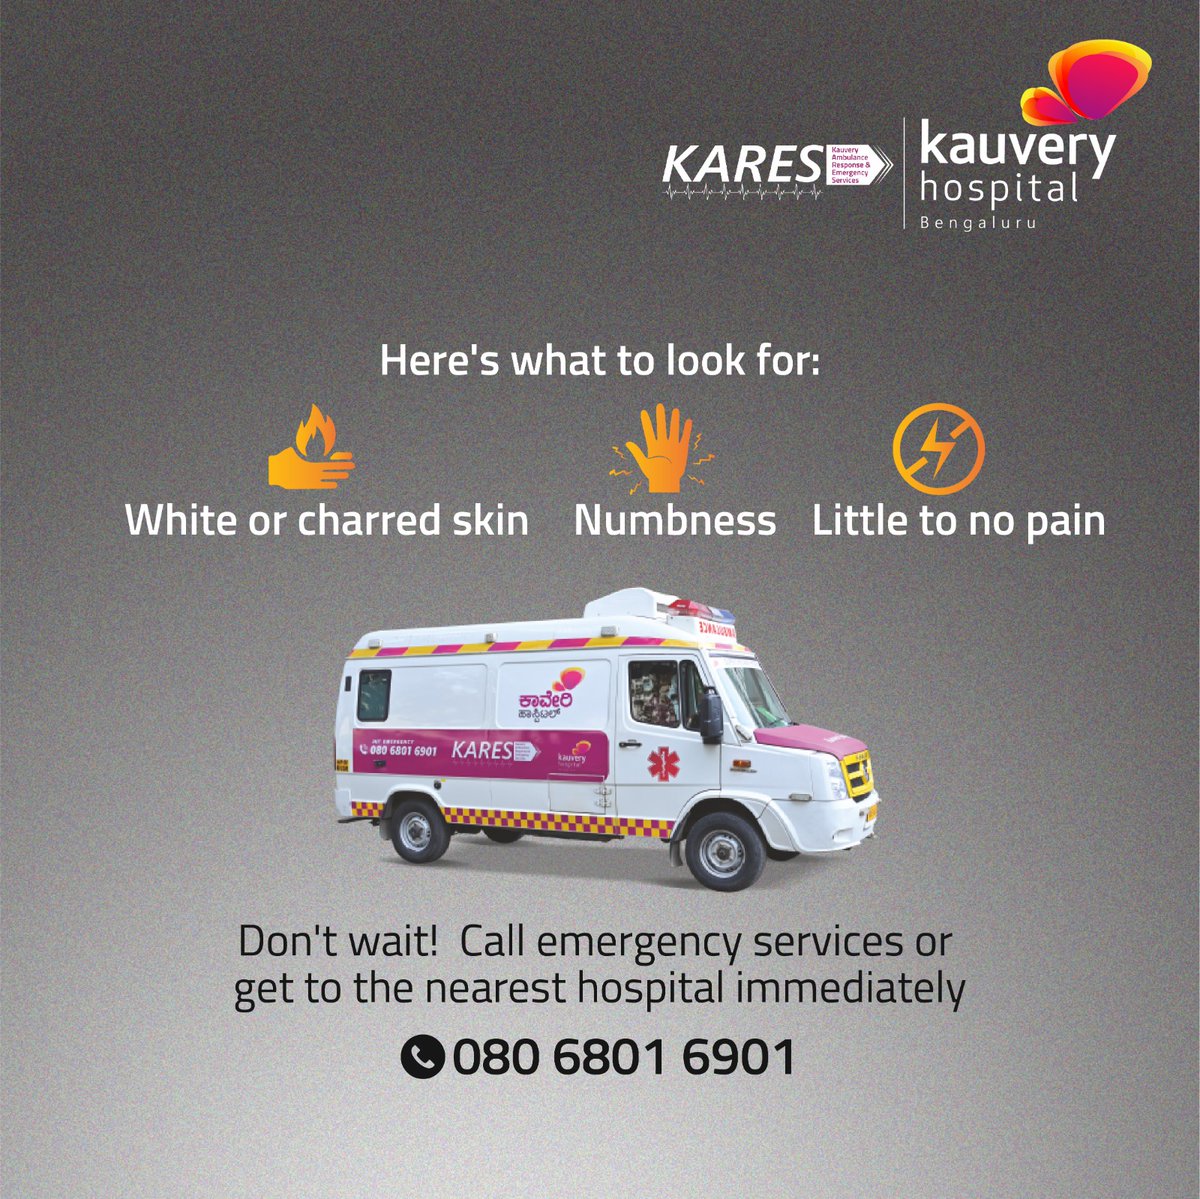 3rd-degree burns require immediate medical attention. If you or someone you know experiences a 3rd degree burn, call emergency services immediately.

Call; 080 6801 6901

#kauveryhospitals #multispecialityhospital #EmergencyCare #AmbulanceServices #PatientTransport #KARES